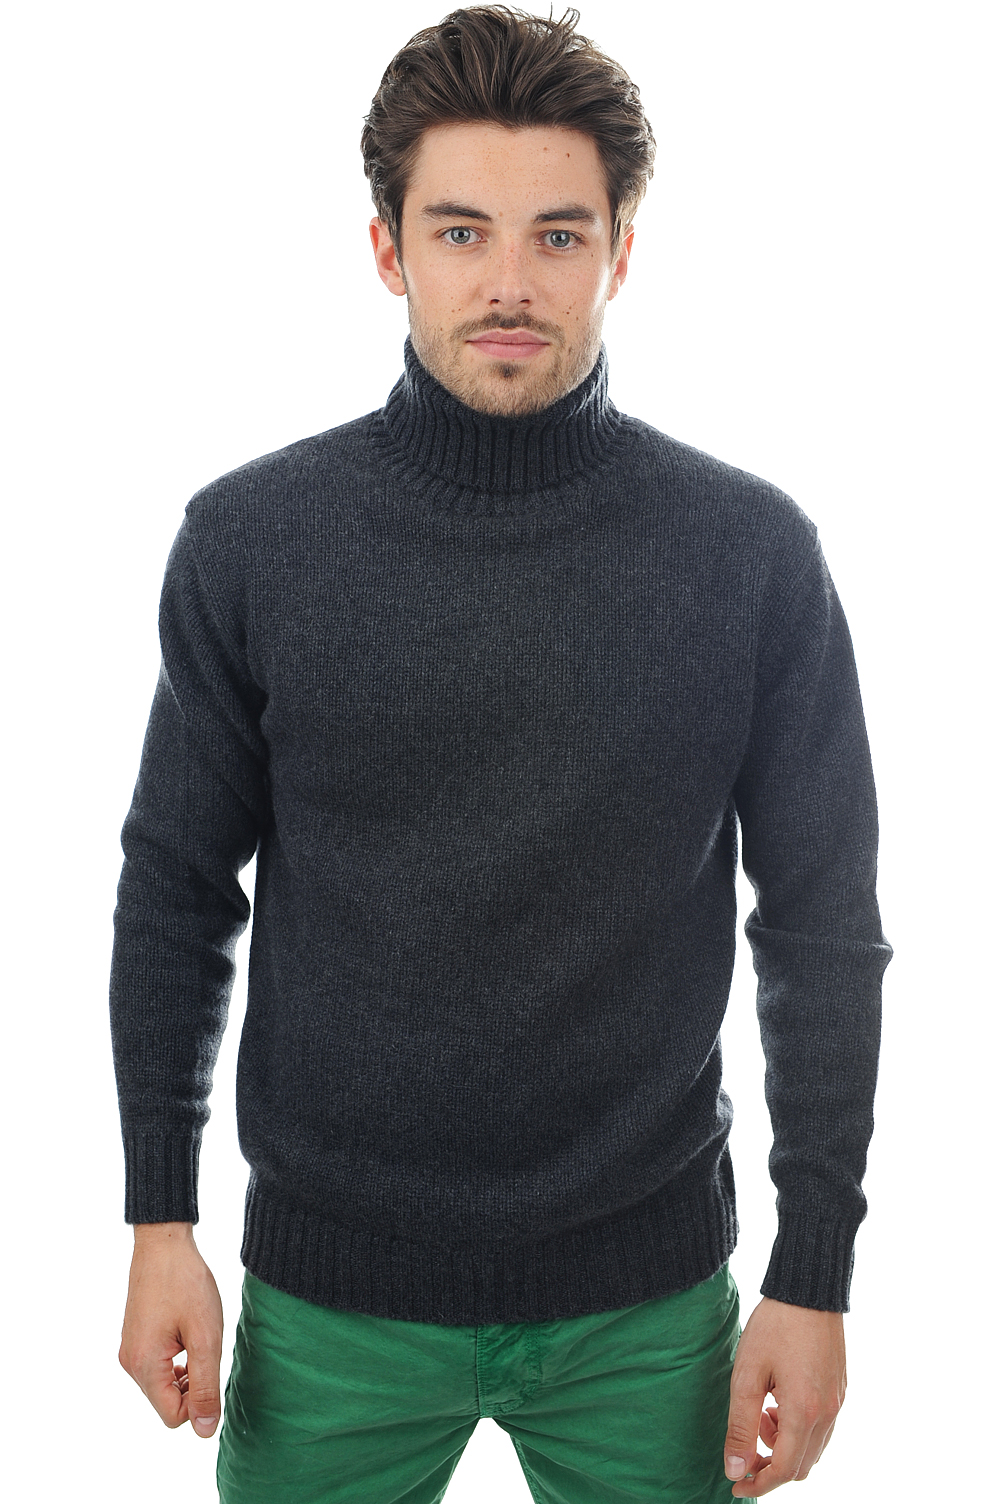 Cashmere men chunky sweater achille charcoal marl 3xl